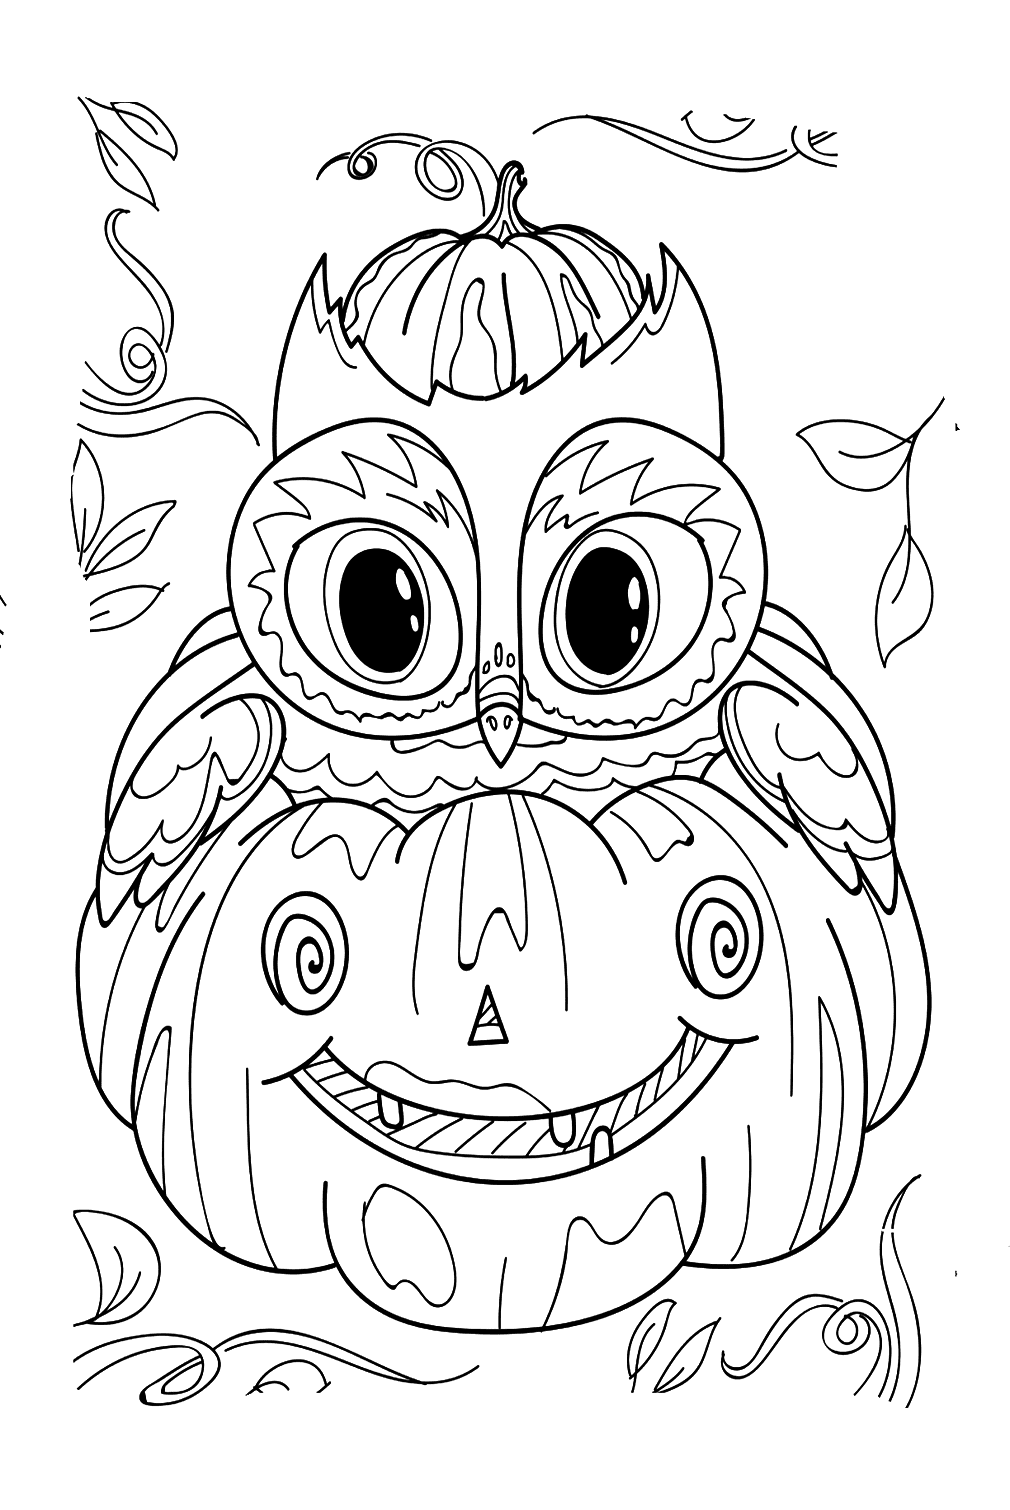 Owl And Pumpkin Coloring Page